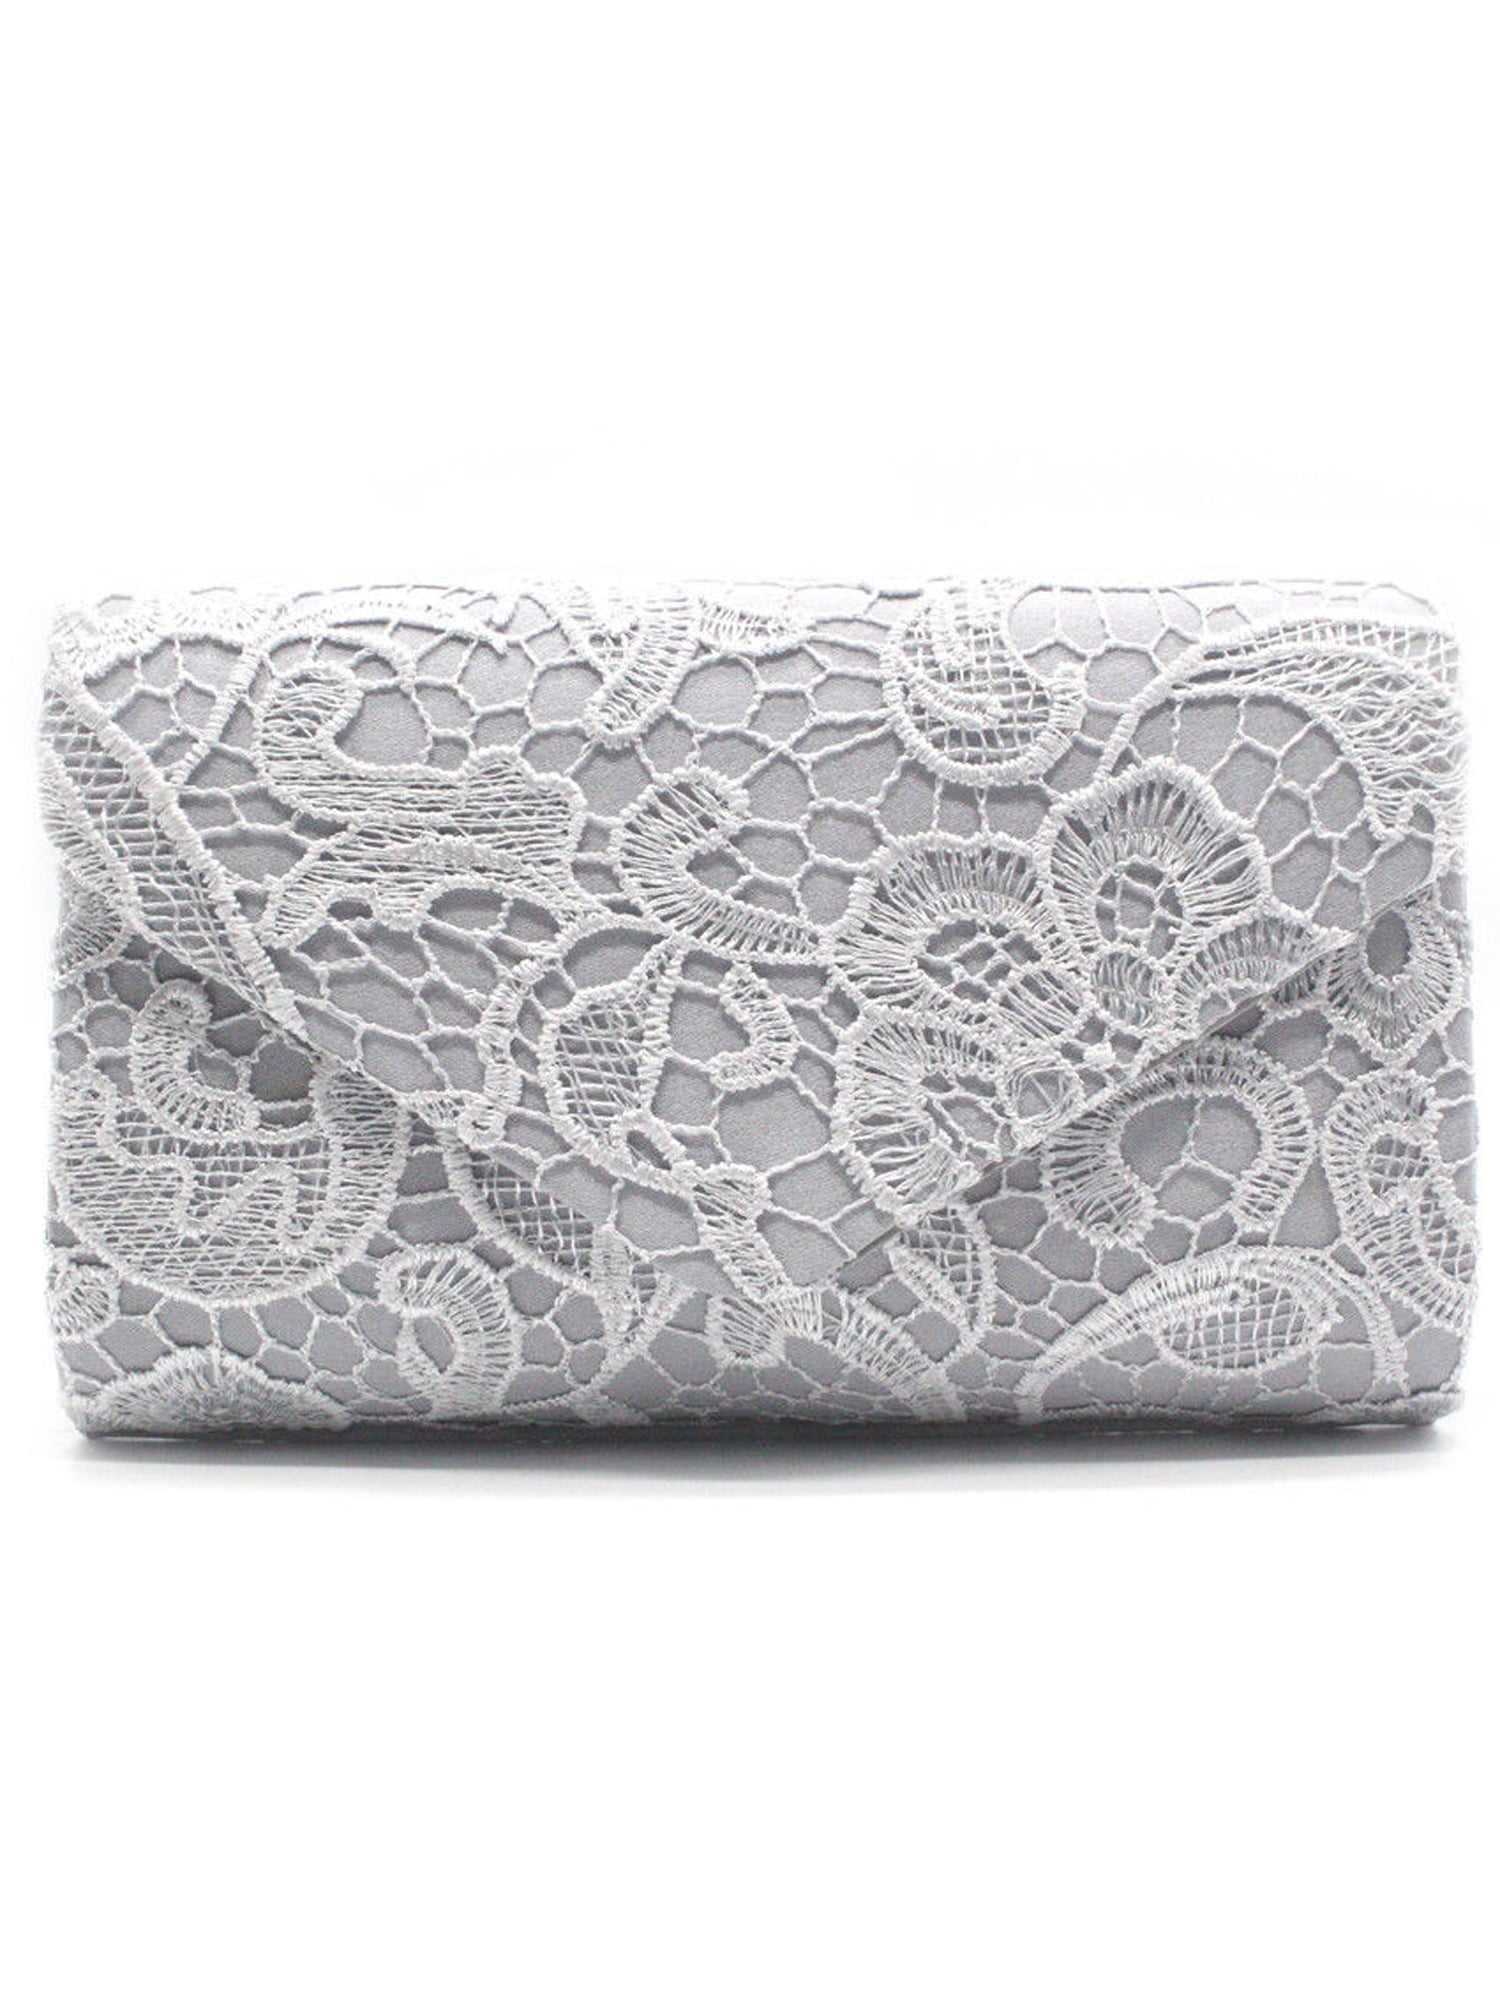 iwish Womens Lace Paisley Floral Bridal Clutch Purses with Rhinestones For Wedding Bridemaid